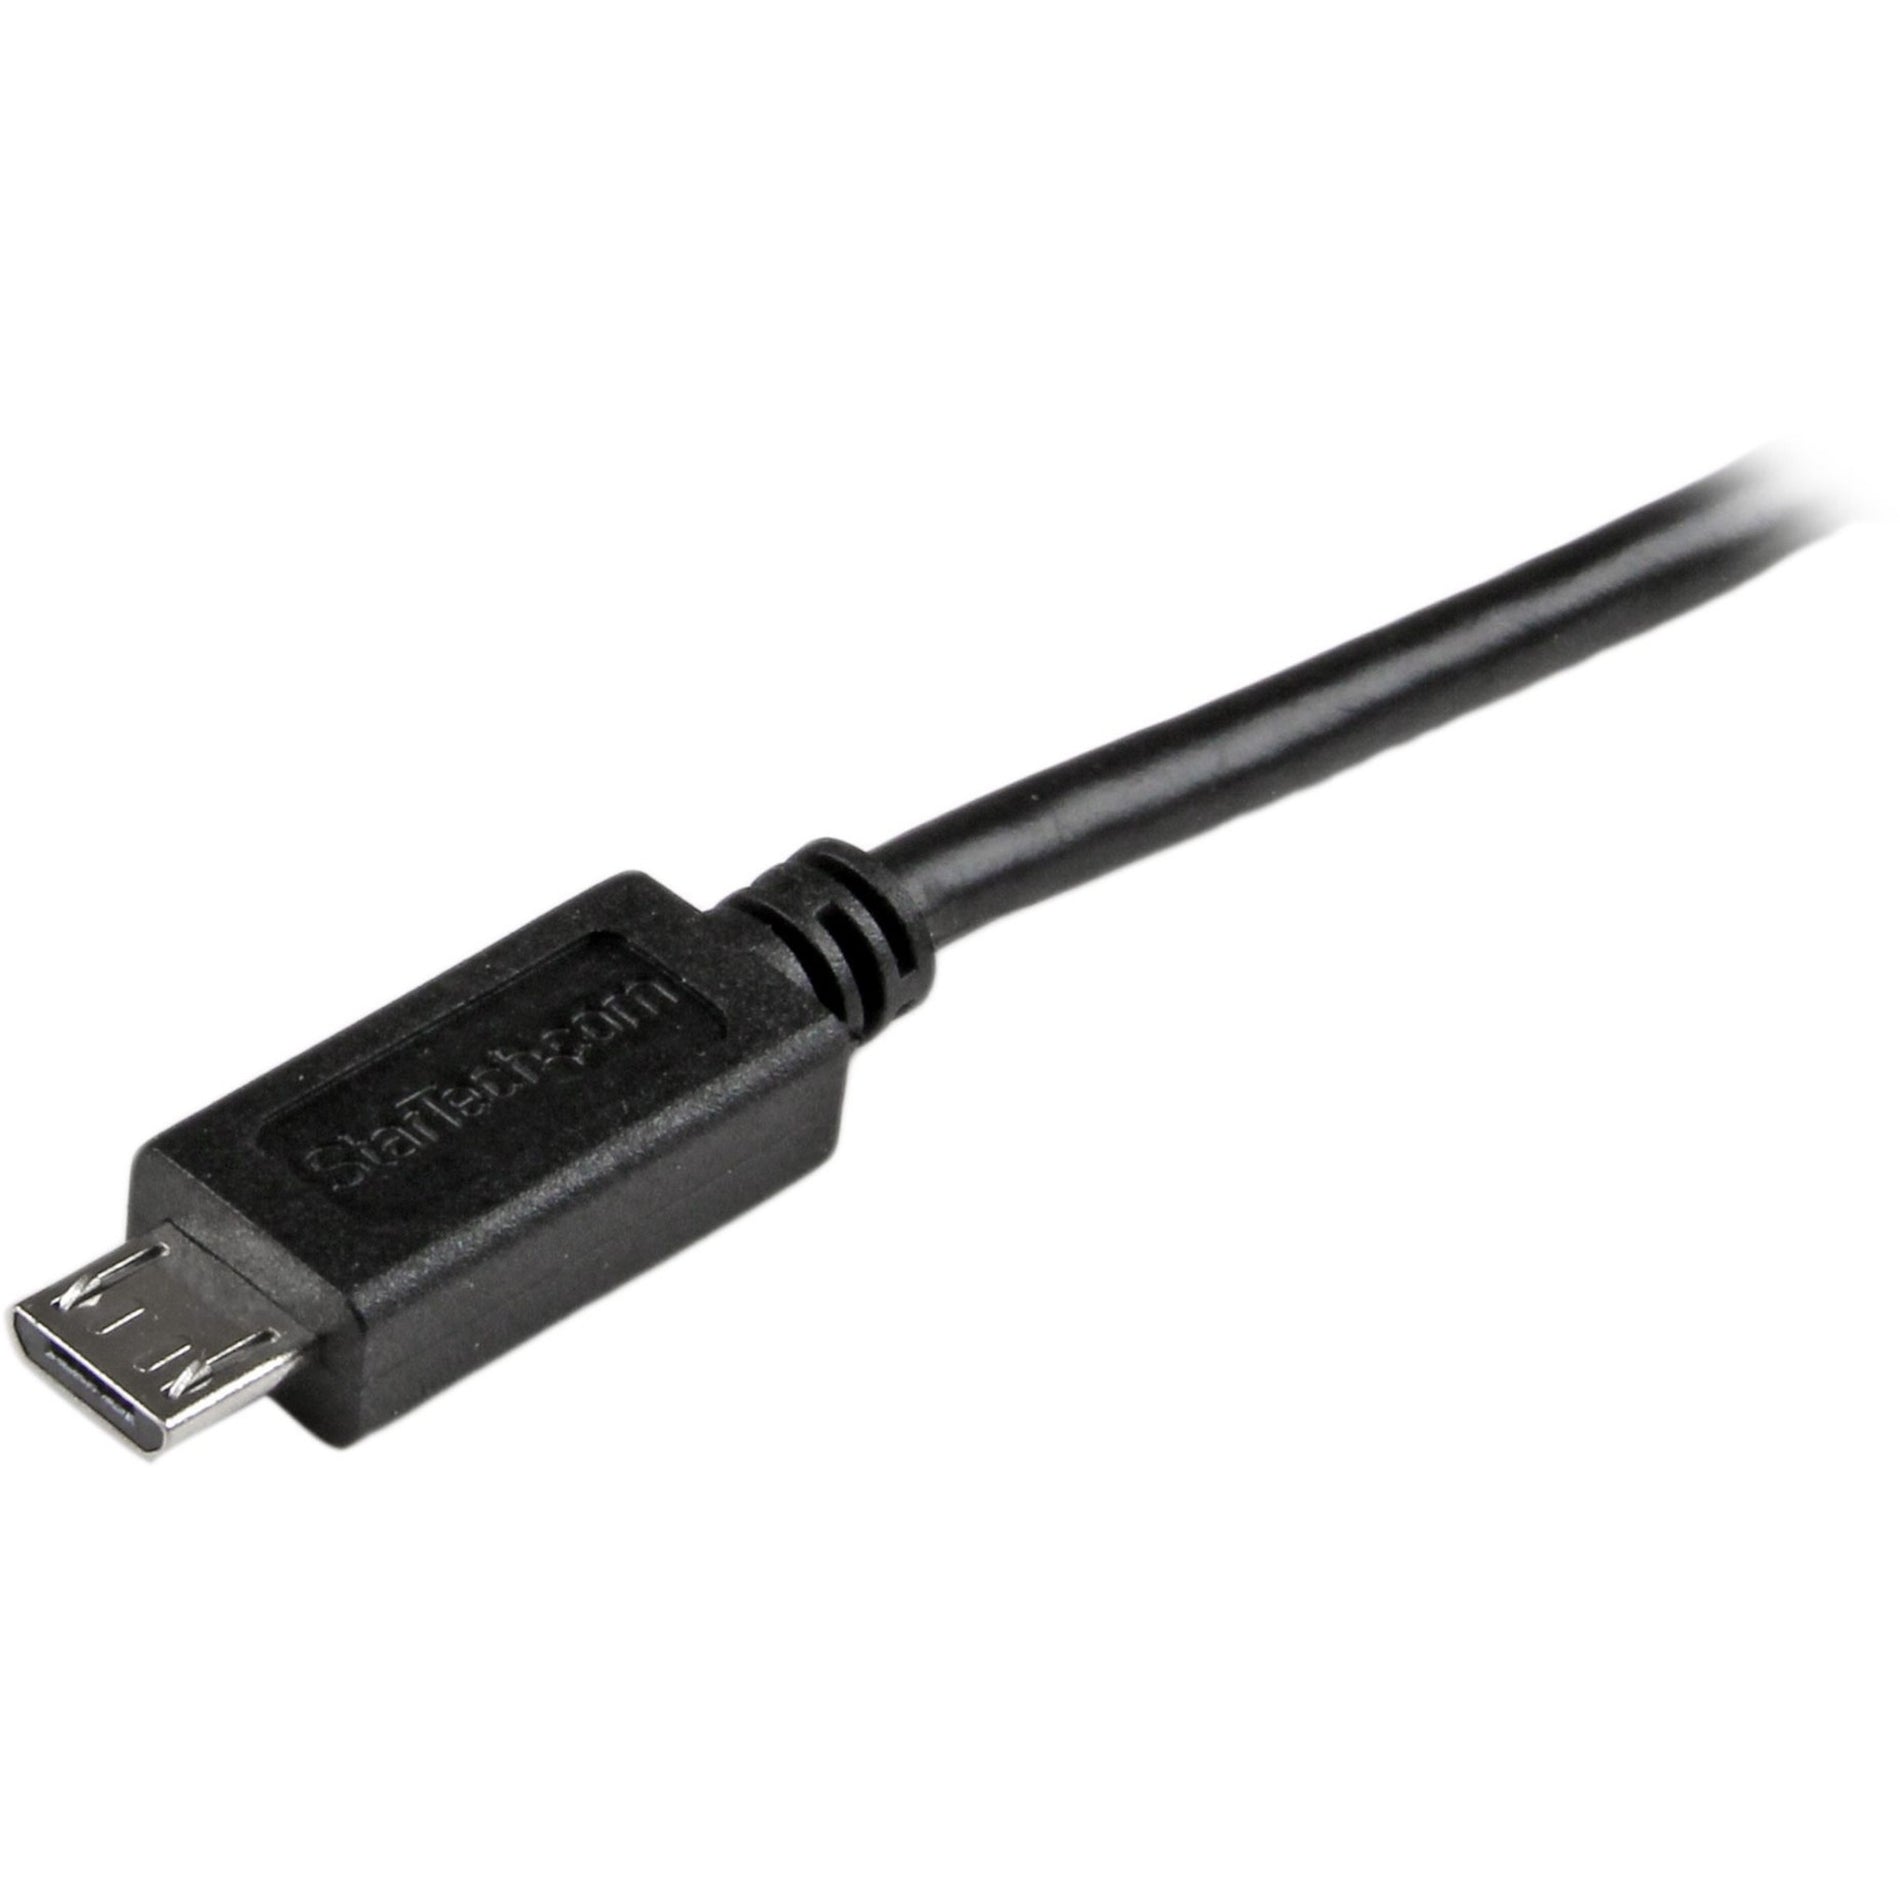 StarTech.com USBAUB3MBK 3m Mobile Charge Sync Micro USB Cable - A to Micro B, 9.84 ft, for Smartphones and Tablets